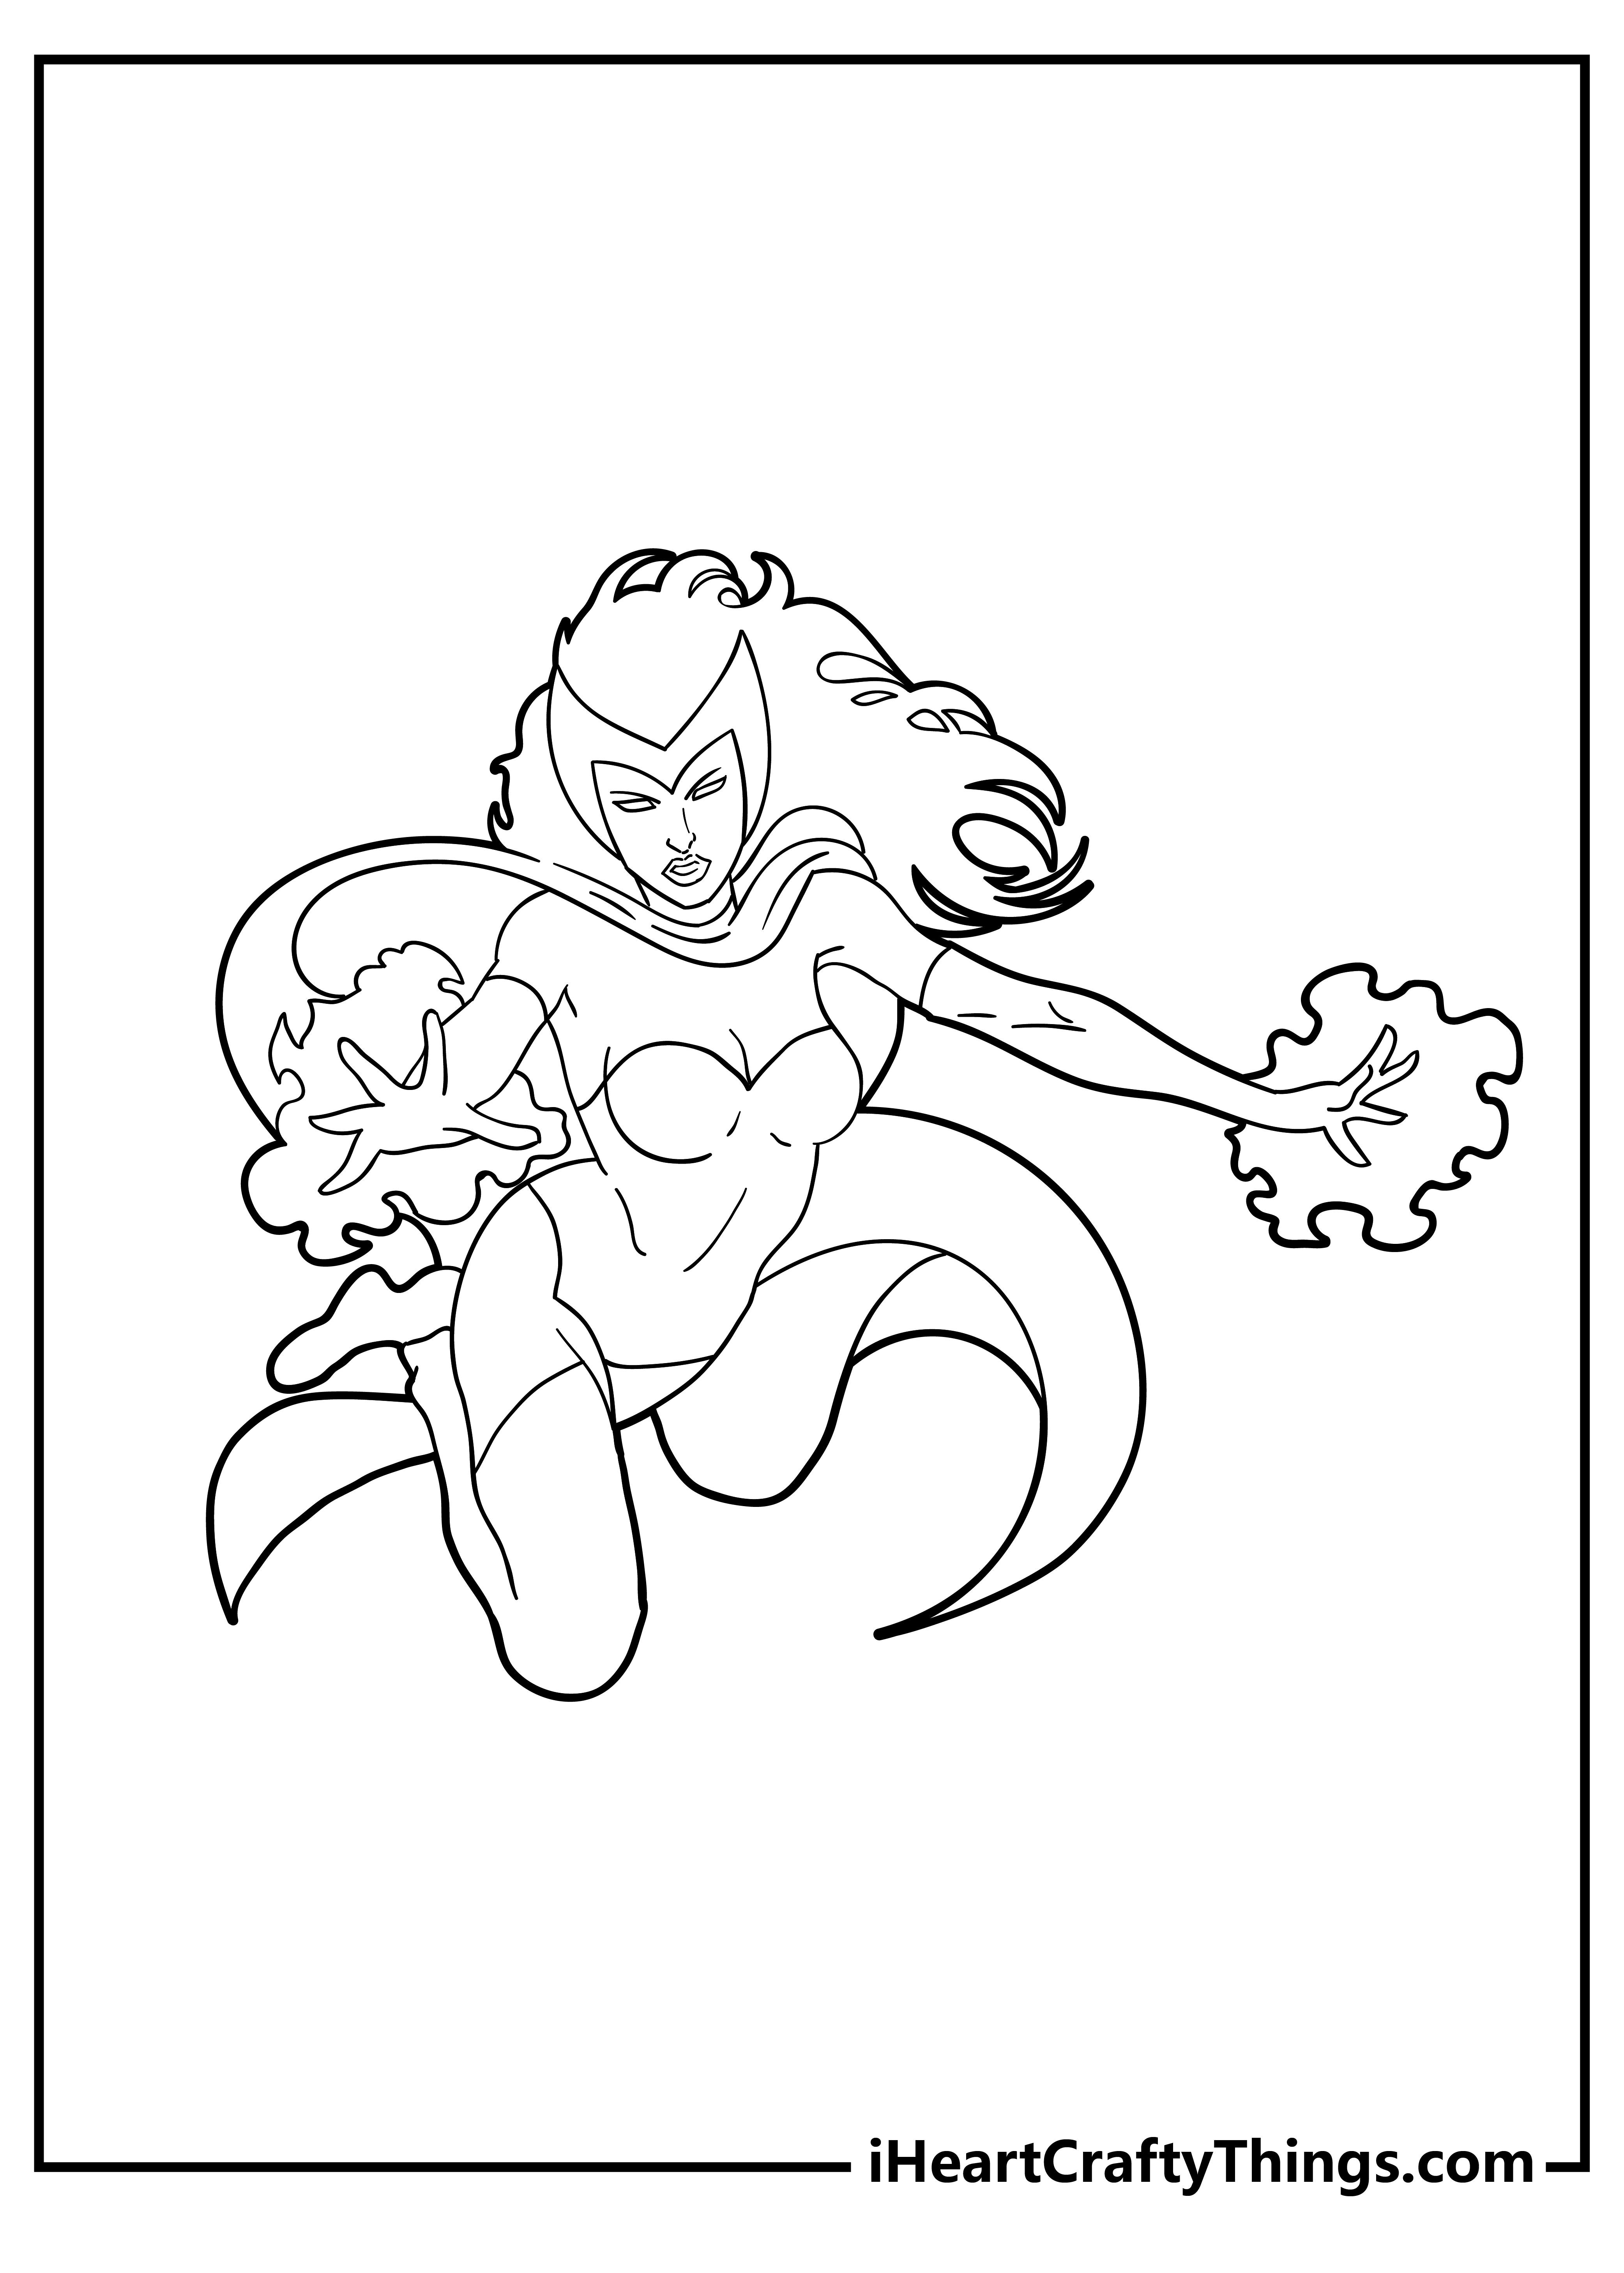 Avengers Coloring Sheet for children free download